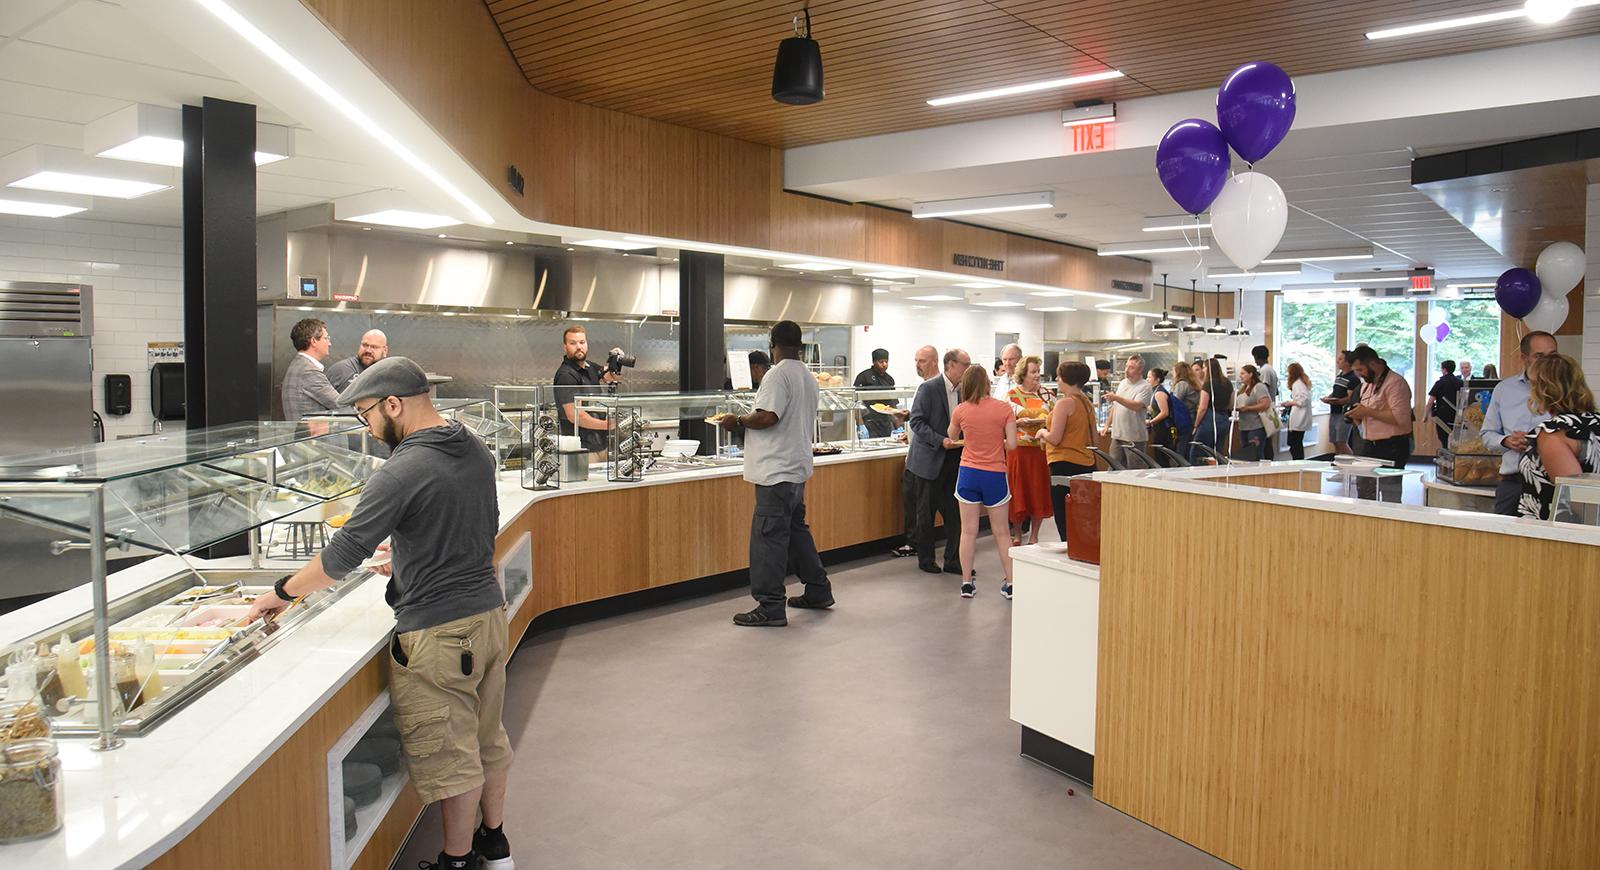 Photo of people serving food to themselves in Anderson Dining Hall on opening day, with some purple balloons nearby